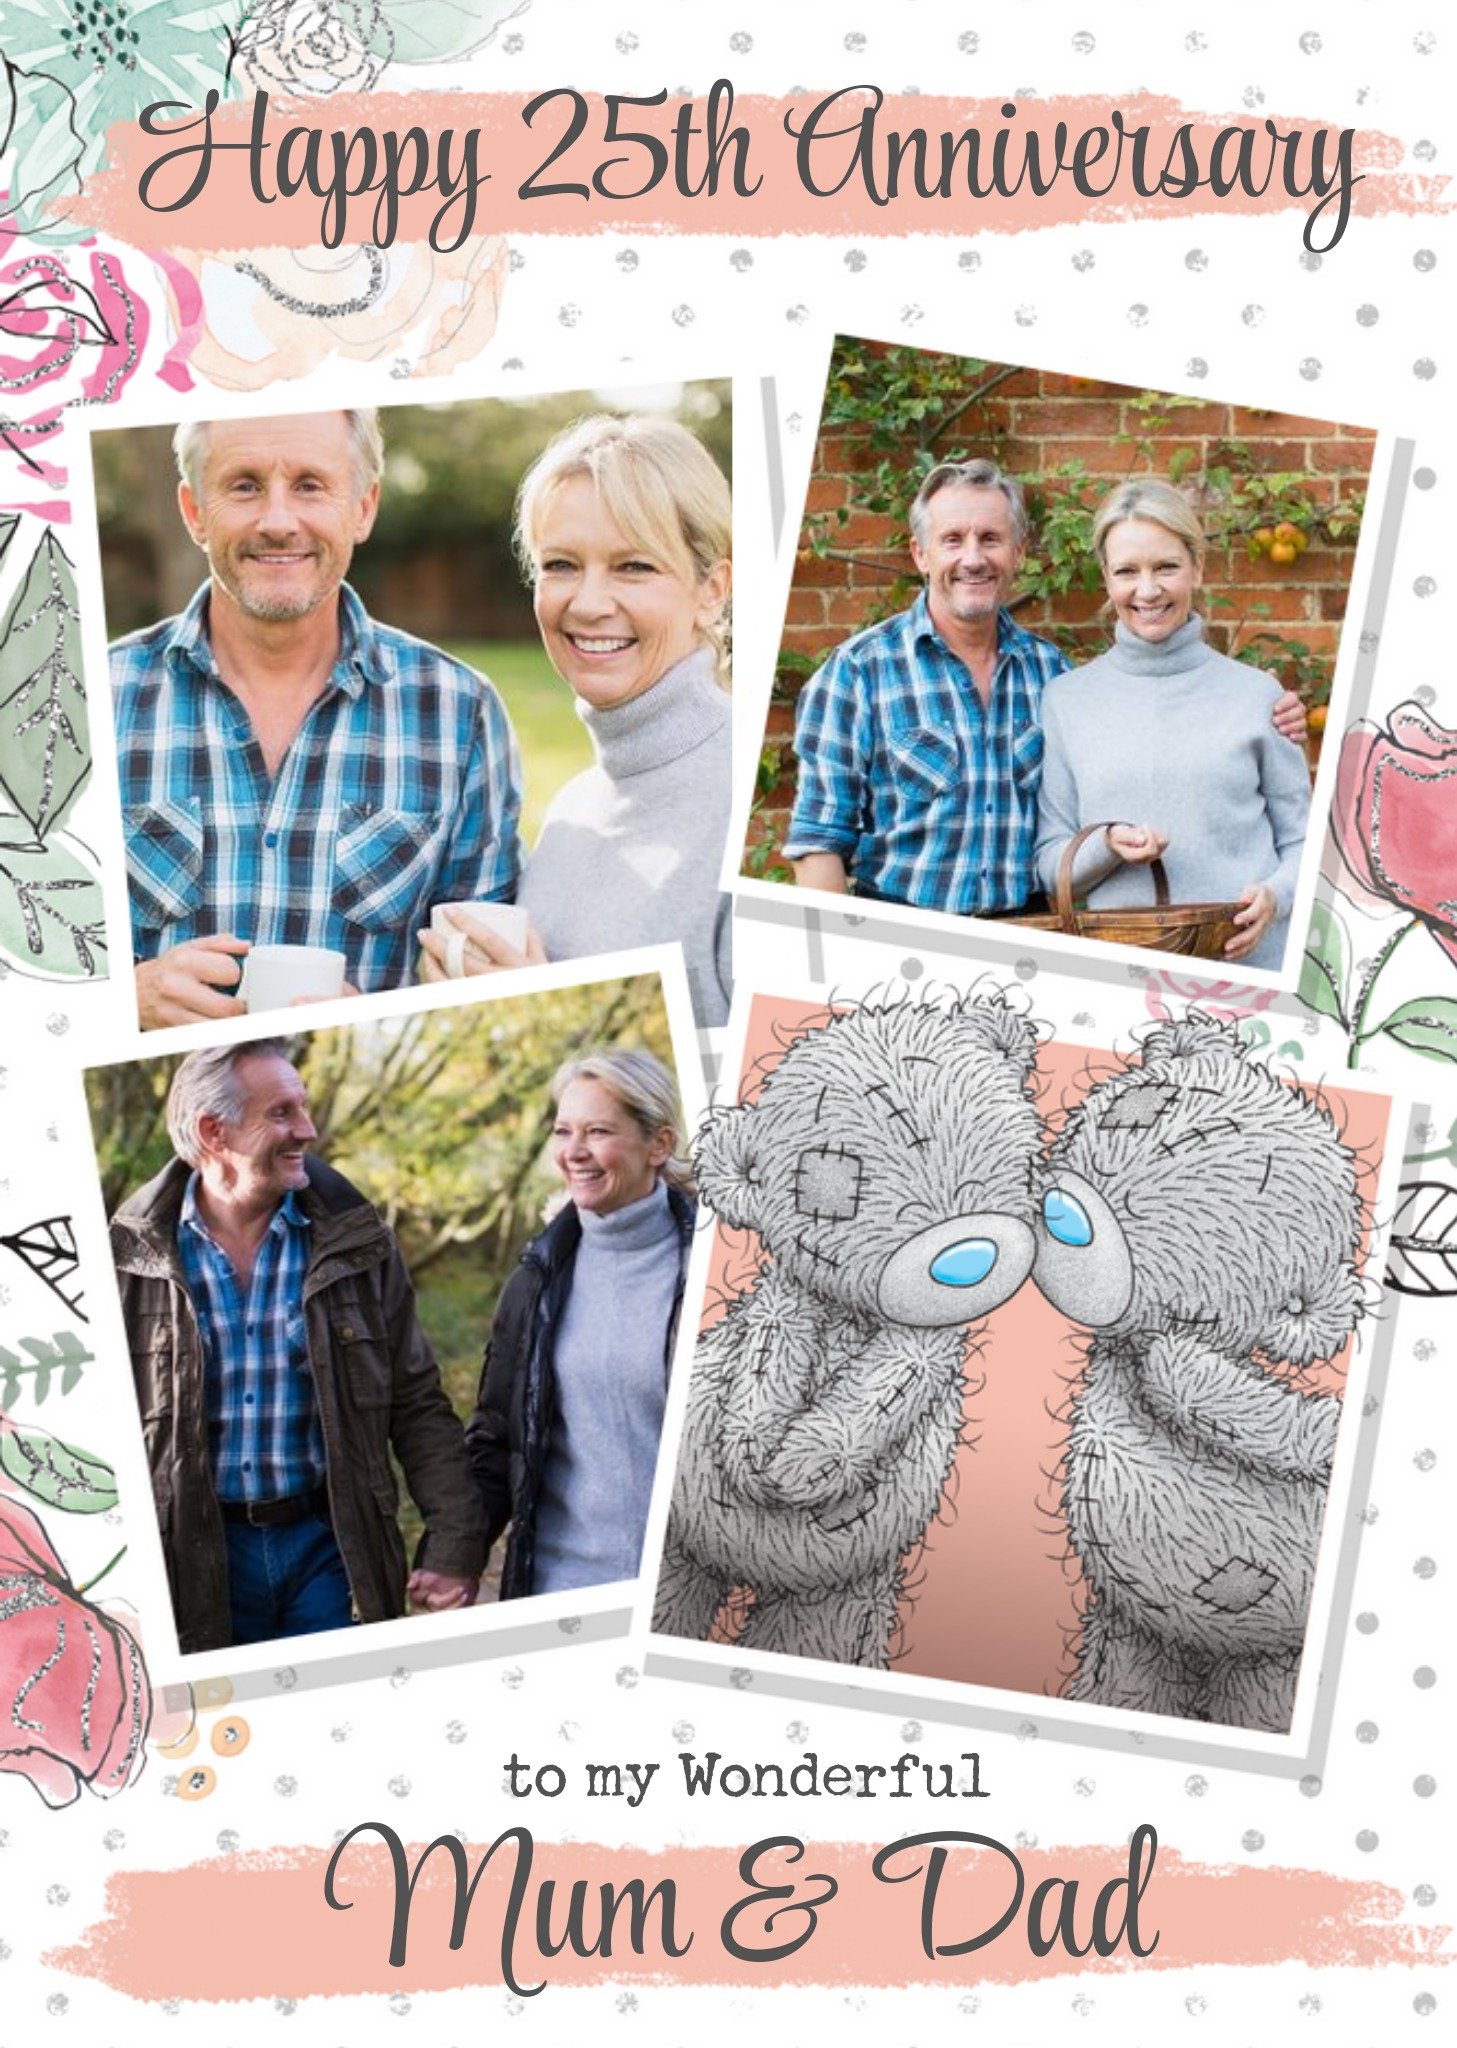 Me To You Tatty Teddy 25th Anniversary Photo Upload Card For Mum & Dad, Large